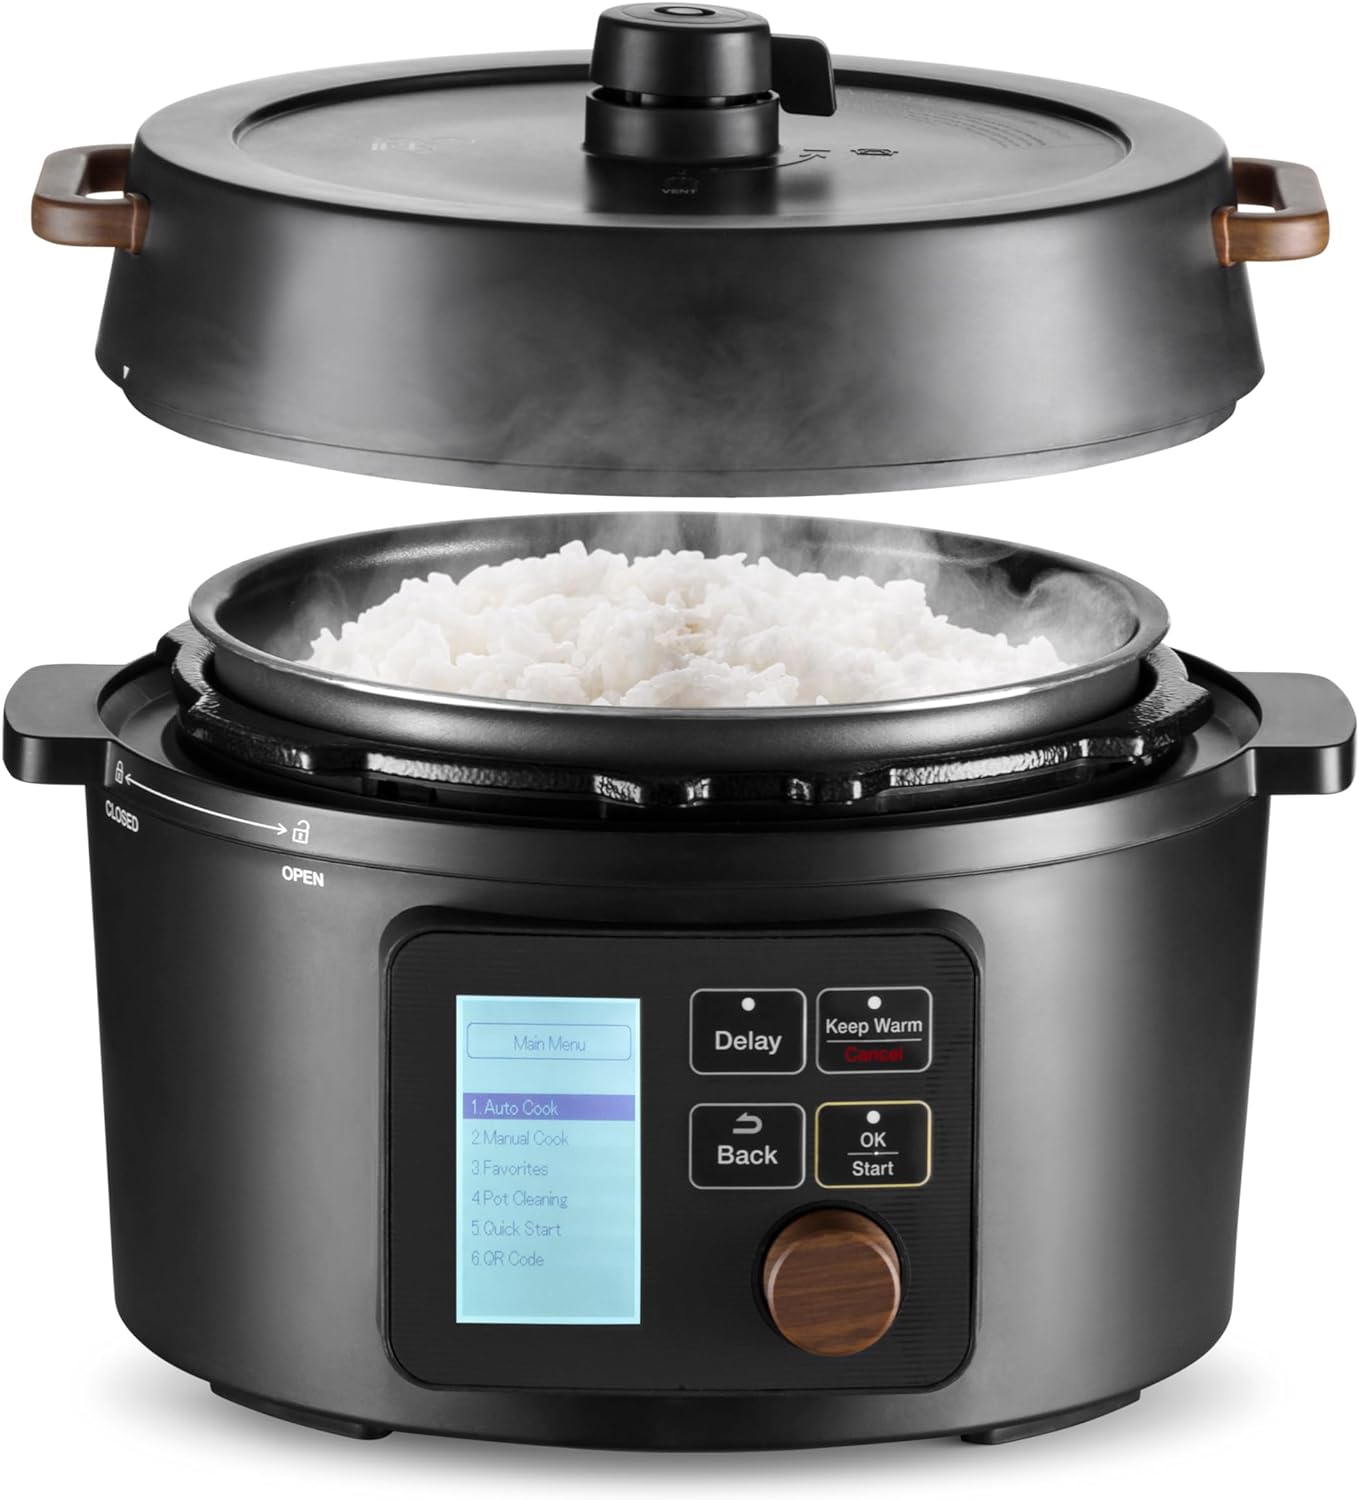 IRIS USA Pressure Rice Cooker Japanese 3 Qt. and 8-in-1 Electric Pressure Cooker, Slow Cooker, Rice Cooker, Steamer, Sear & Sauté, for 2-3 People with Over 110 Pre-Programmed Recipes, Black